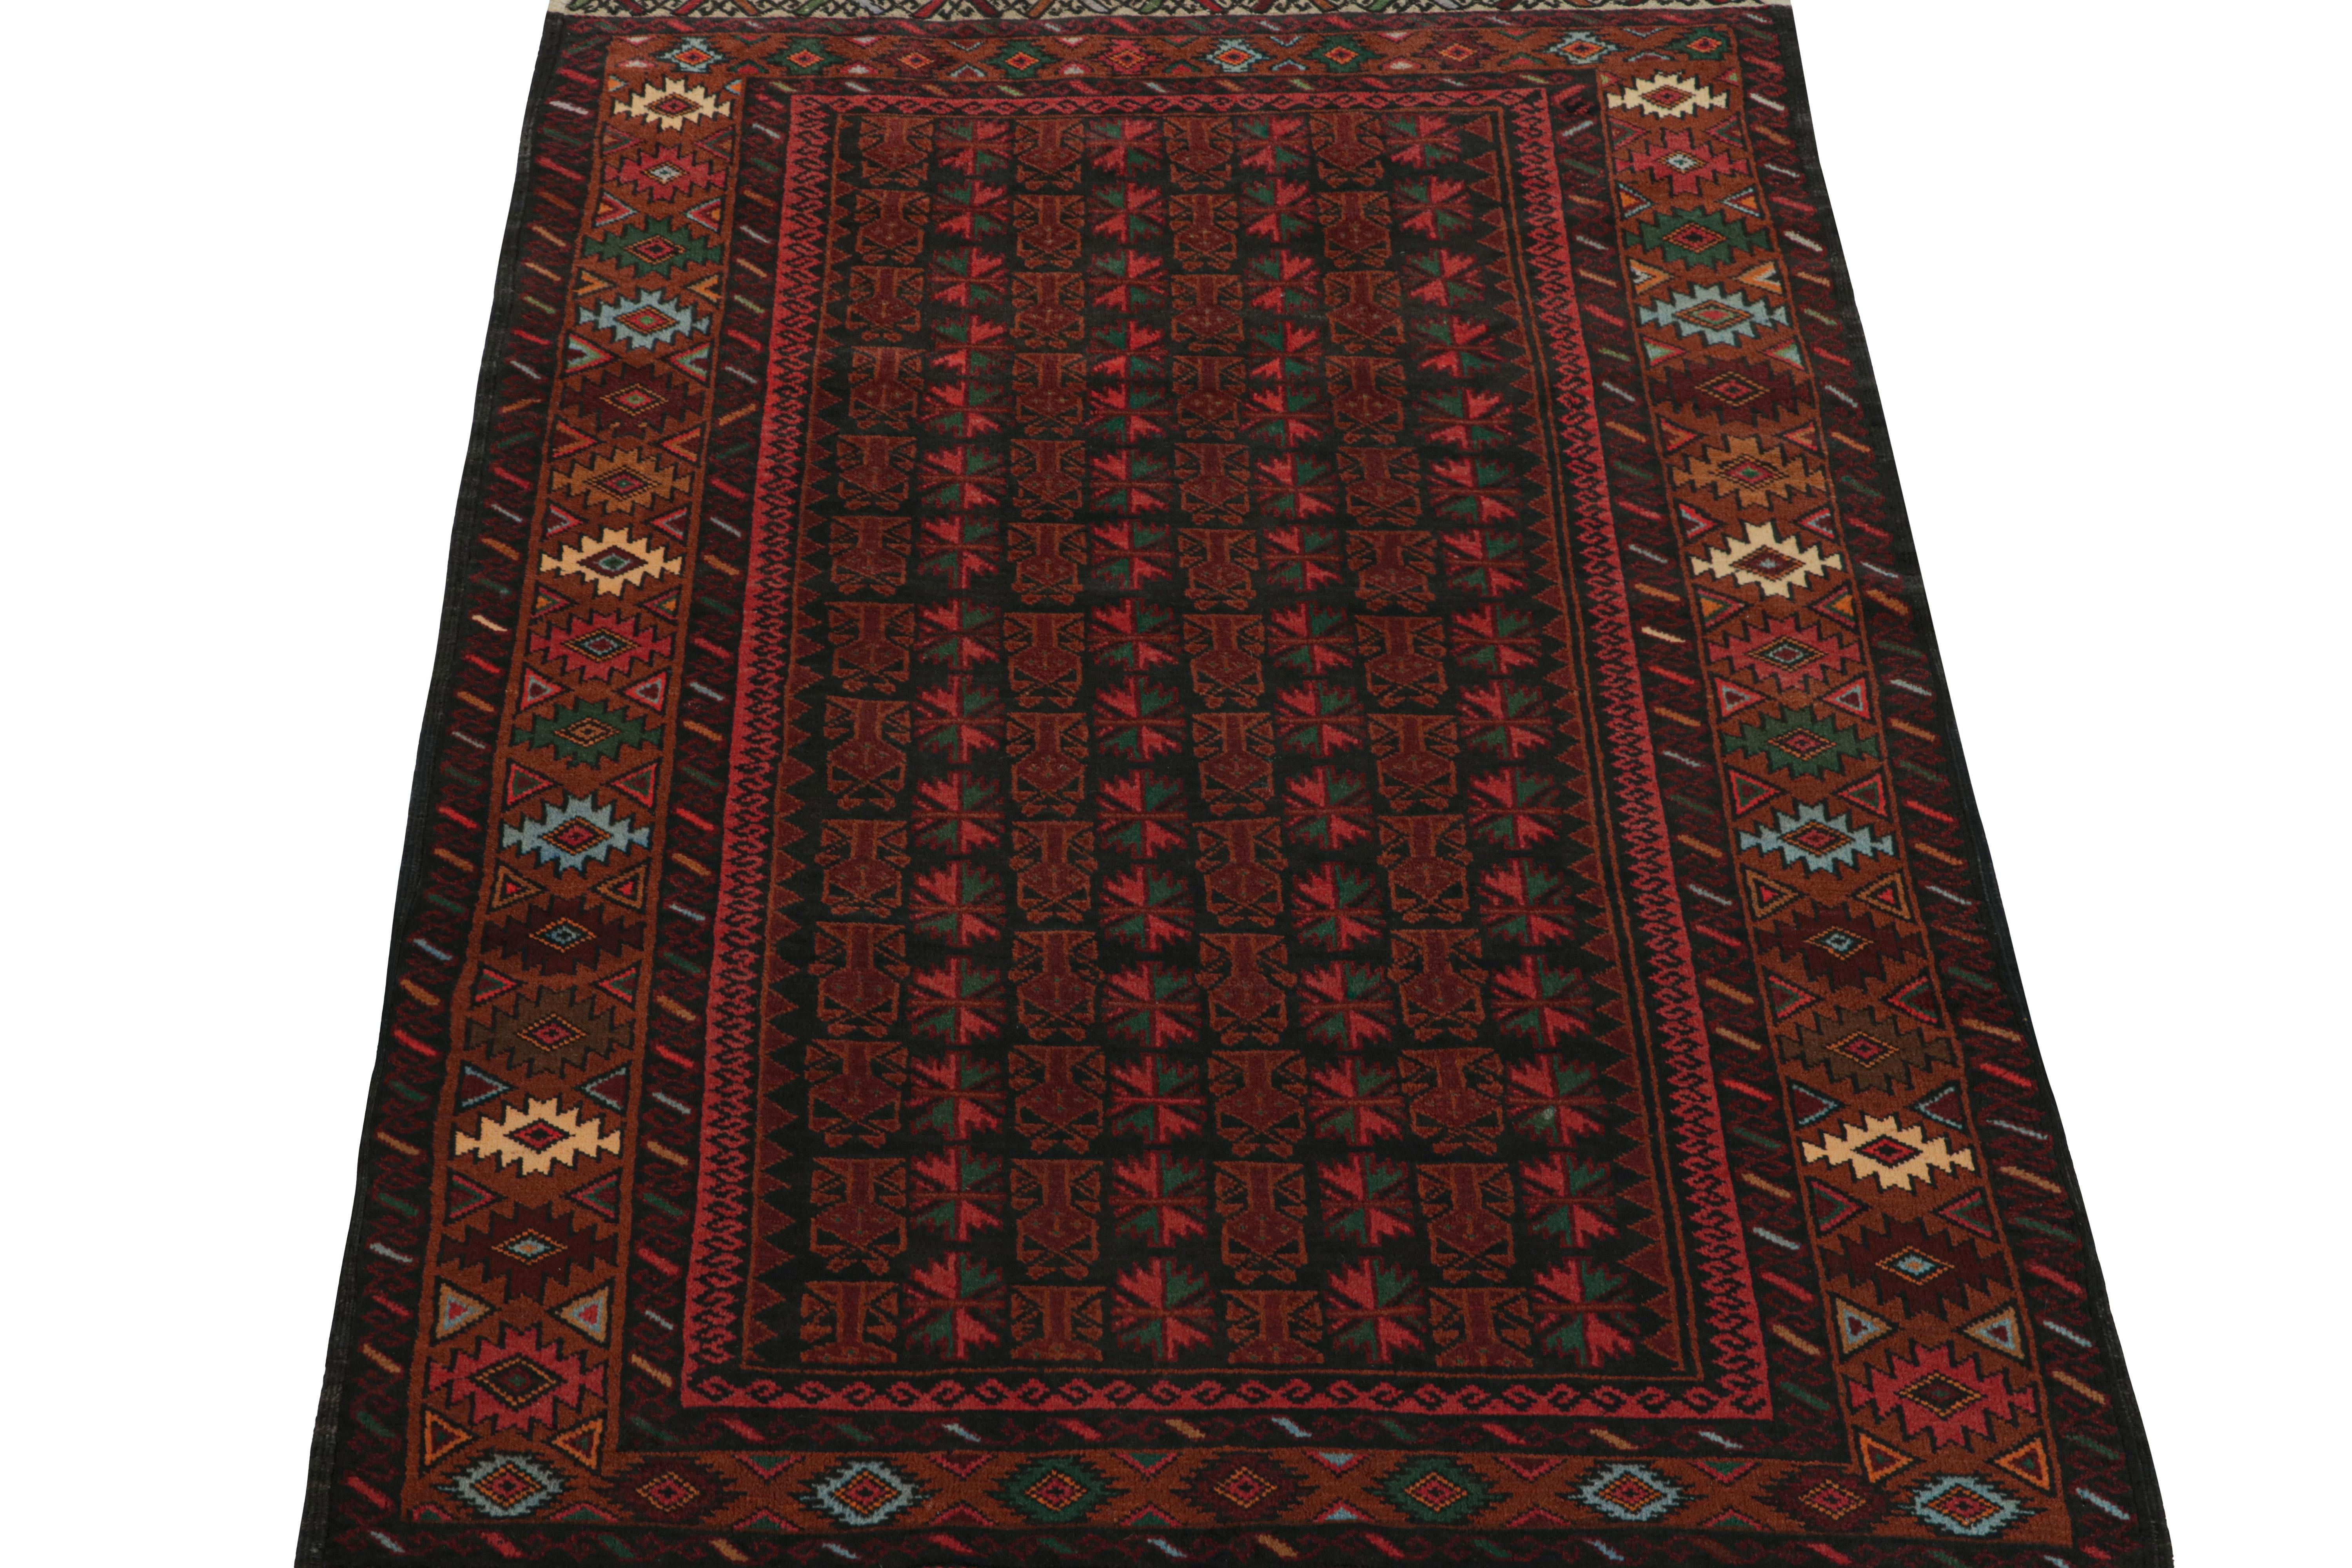 Afghan Vintage Baluch Tribal Rug with Red & Teal Geometric Patterns, from Rug & Kilim For Sale